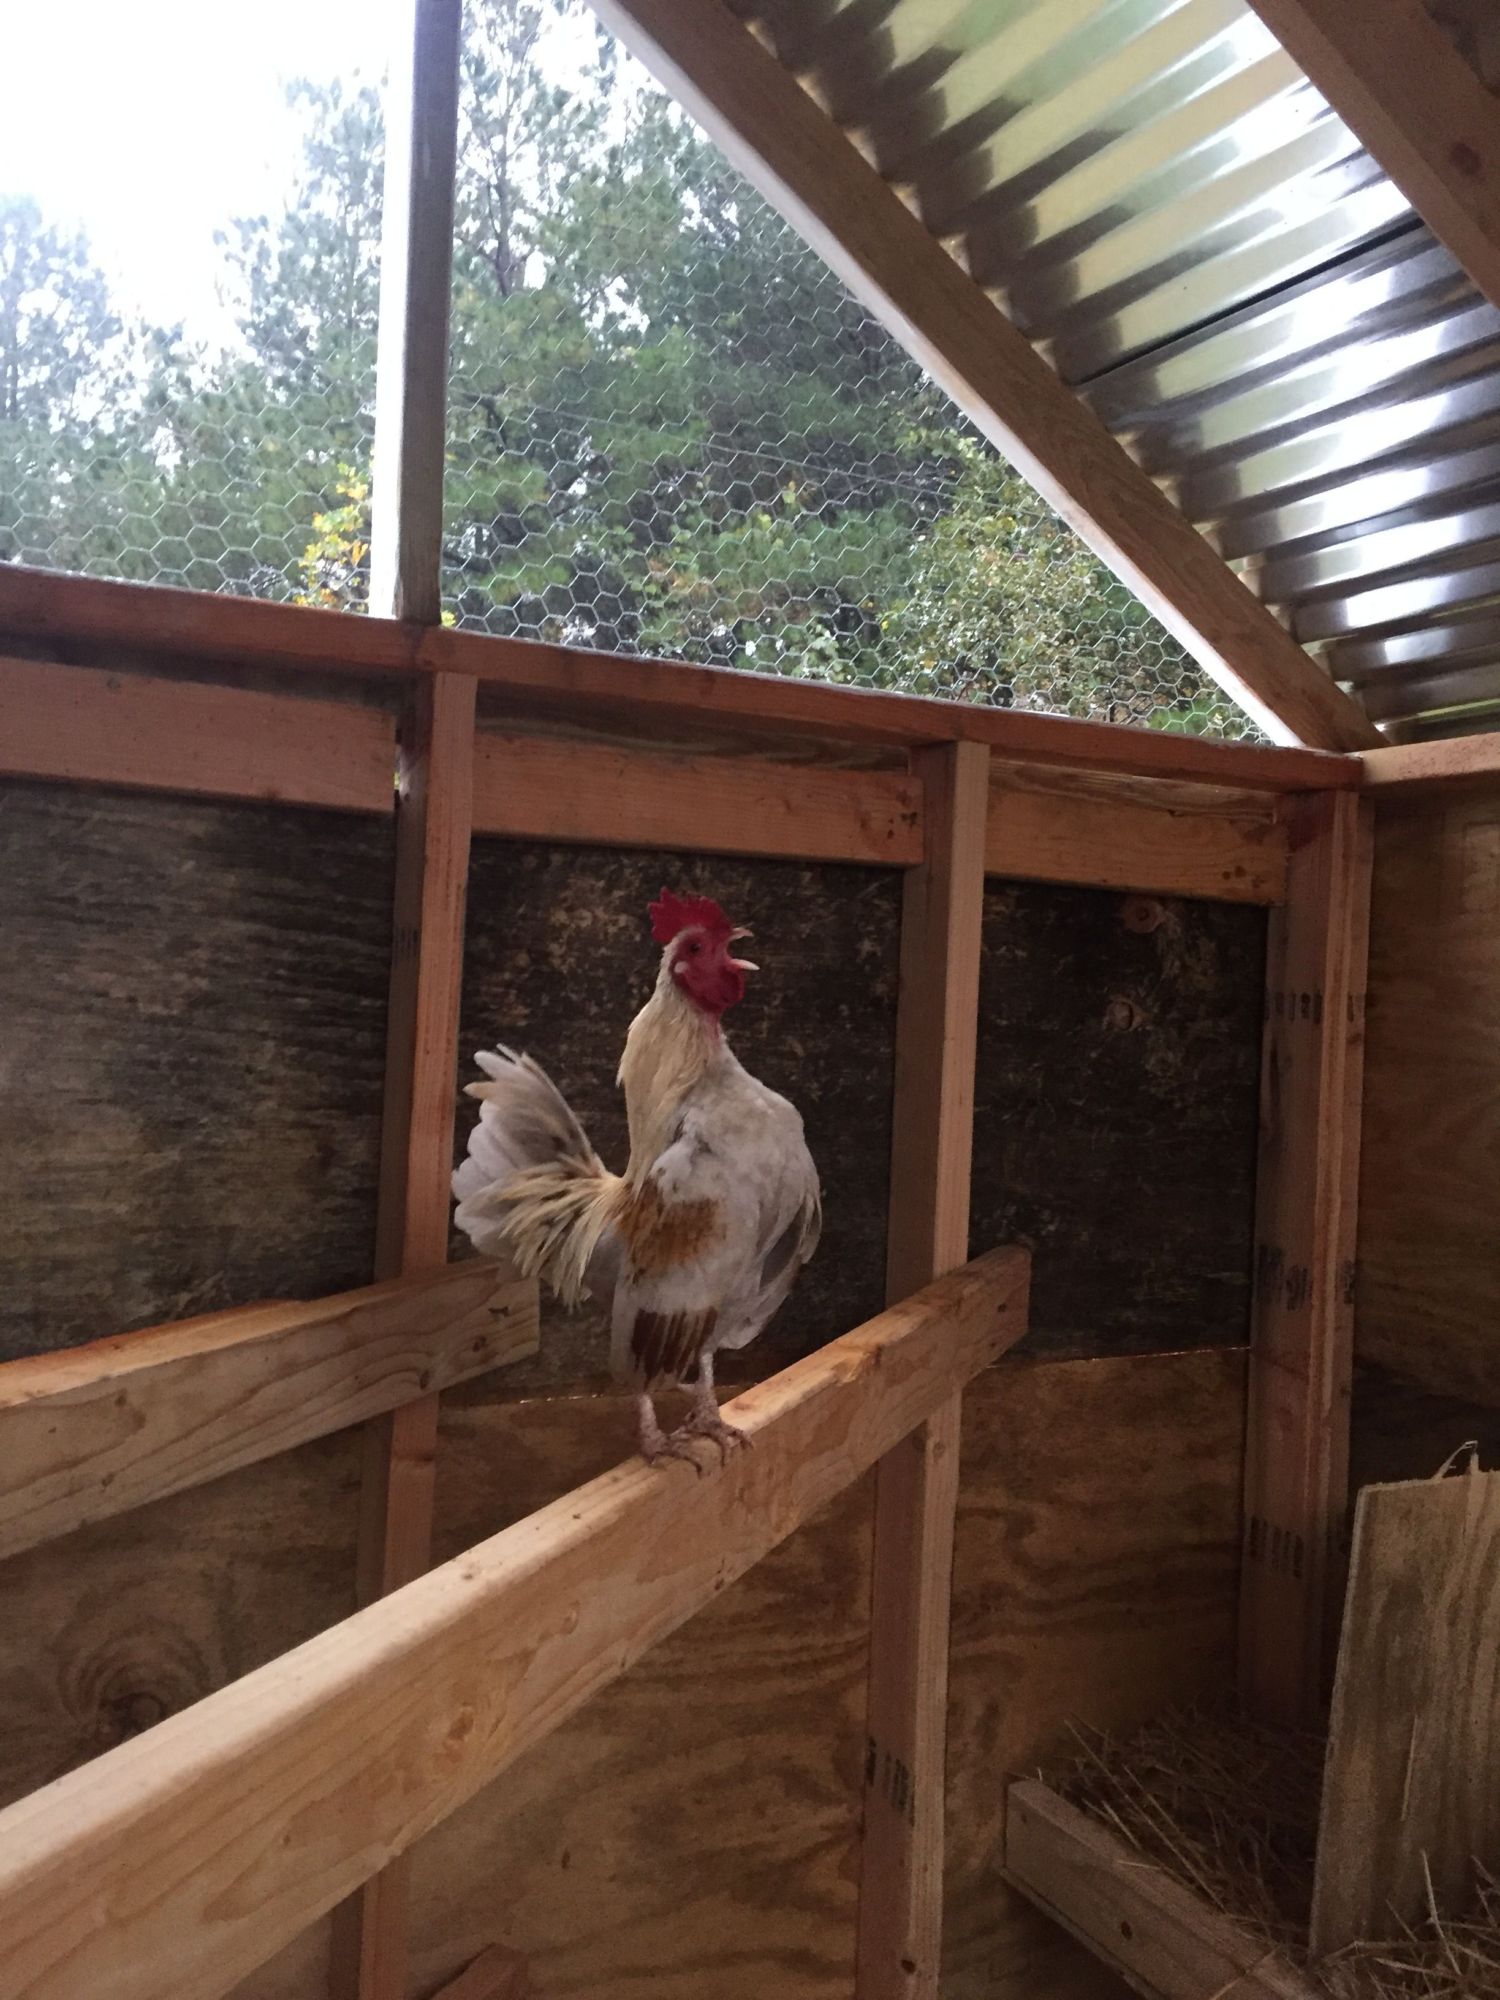 We got ole Pepe back. He has the new coop to himself until we get the chicks raised. Cock-a-doodle-doo!!